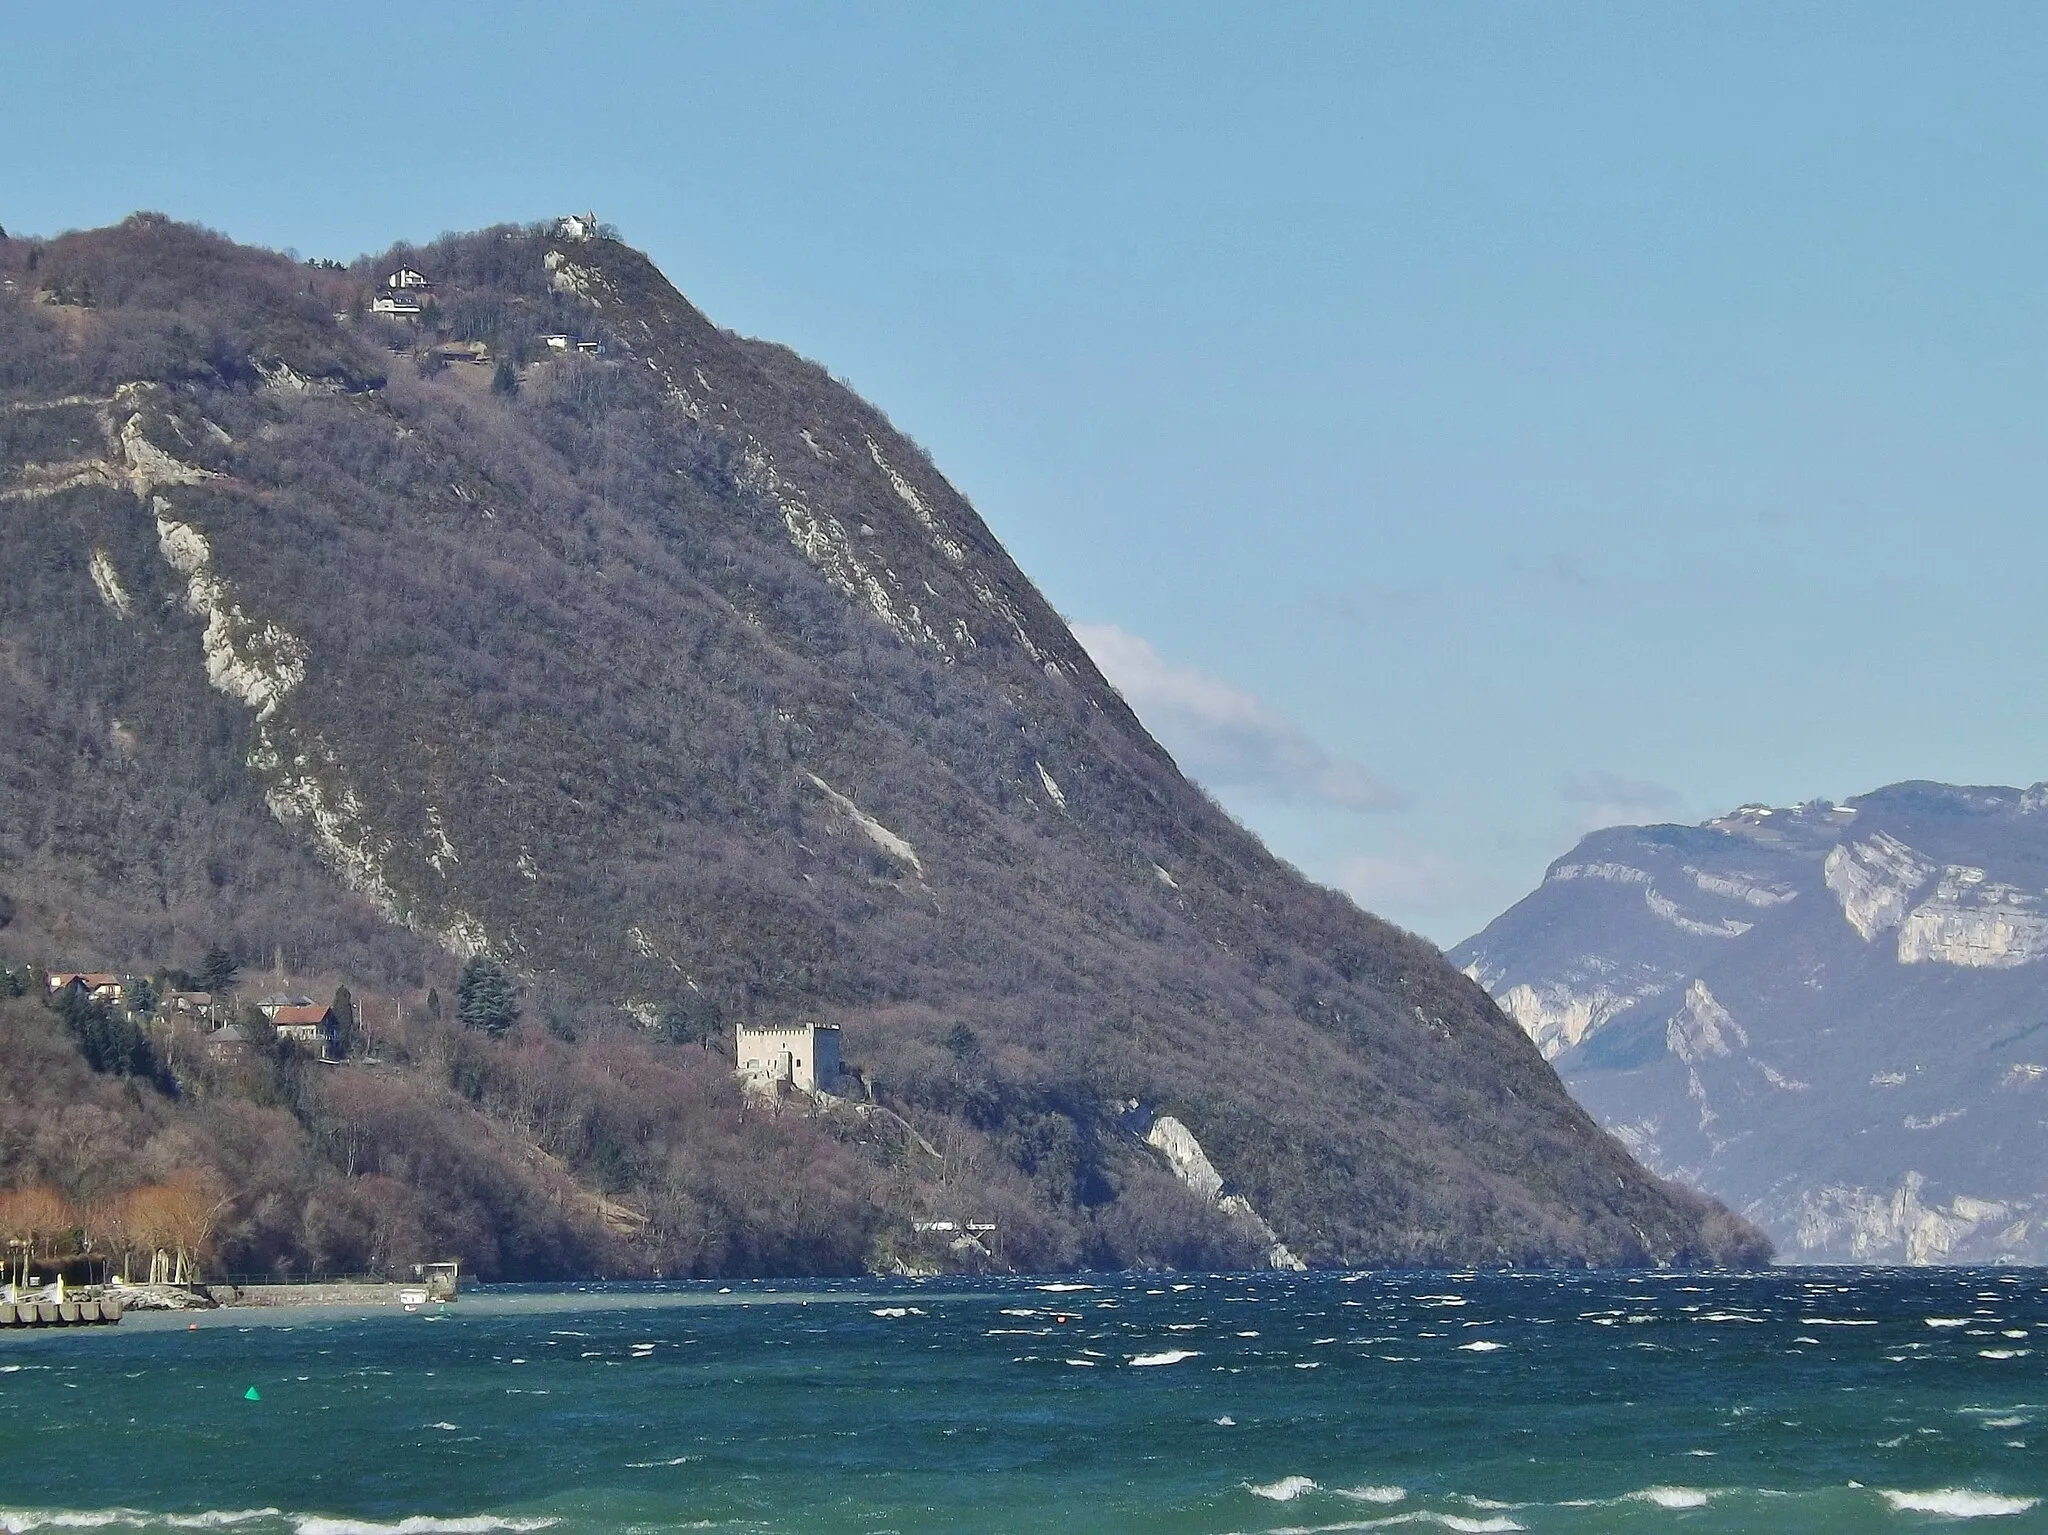 Photo showing: Sight of the château de Bourdeau castle and the choppy waters of the lac du Bourget lake during a windy day, in Savoie, France.